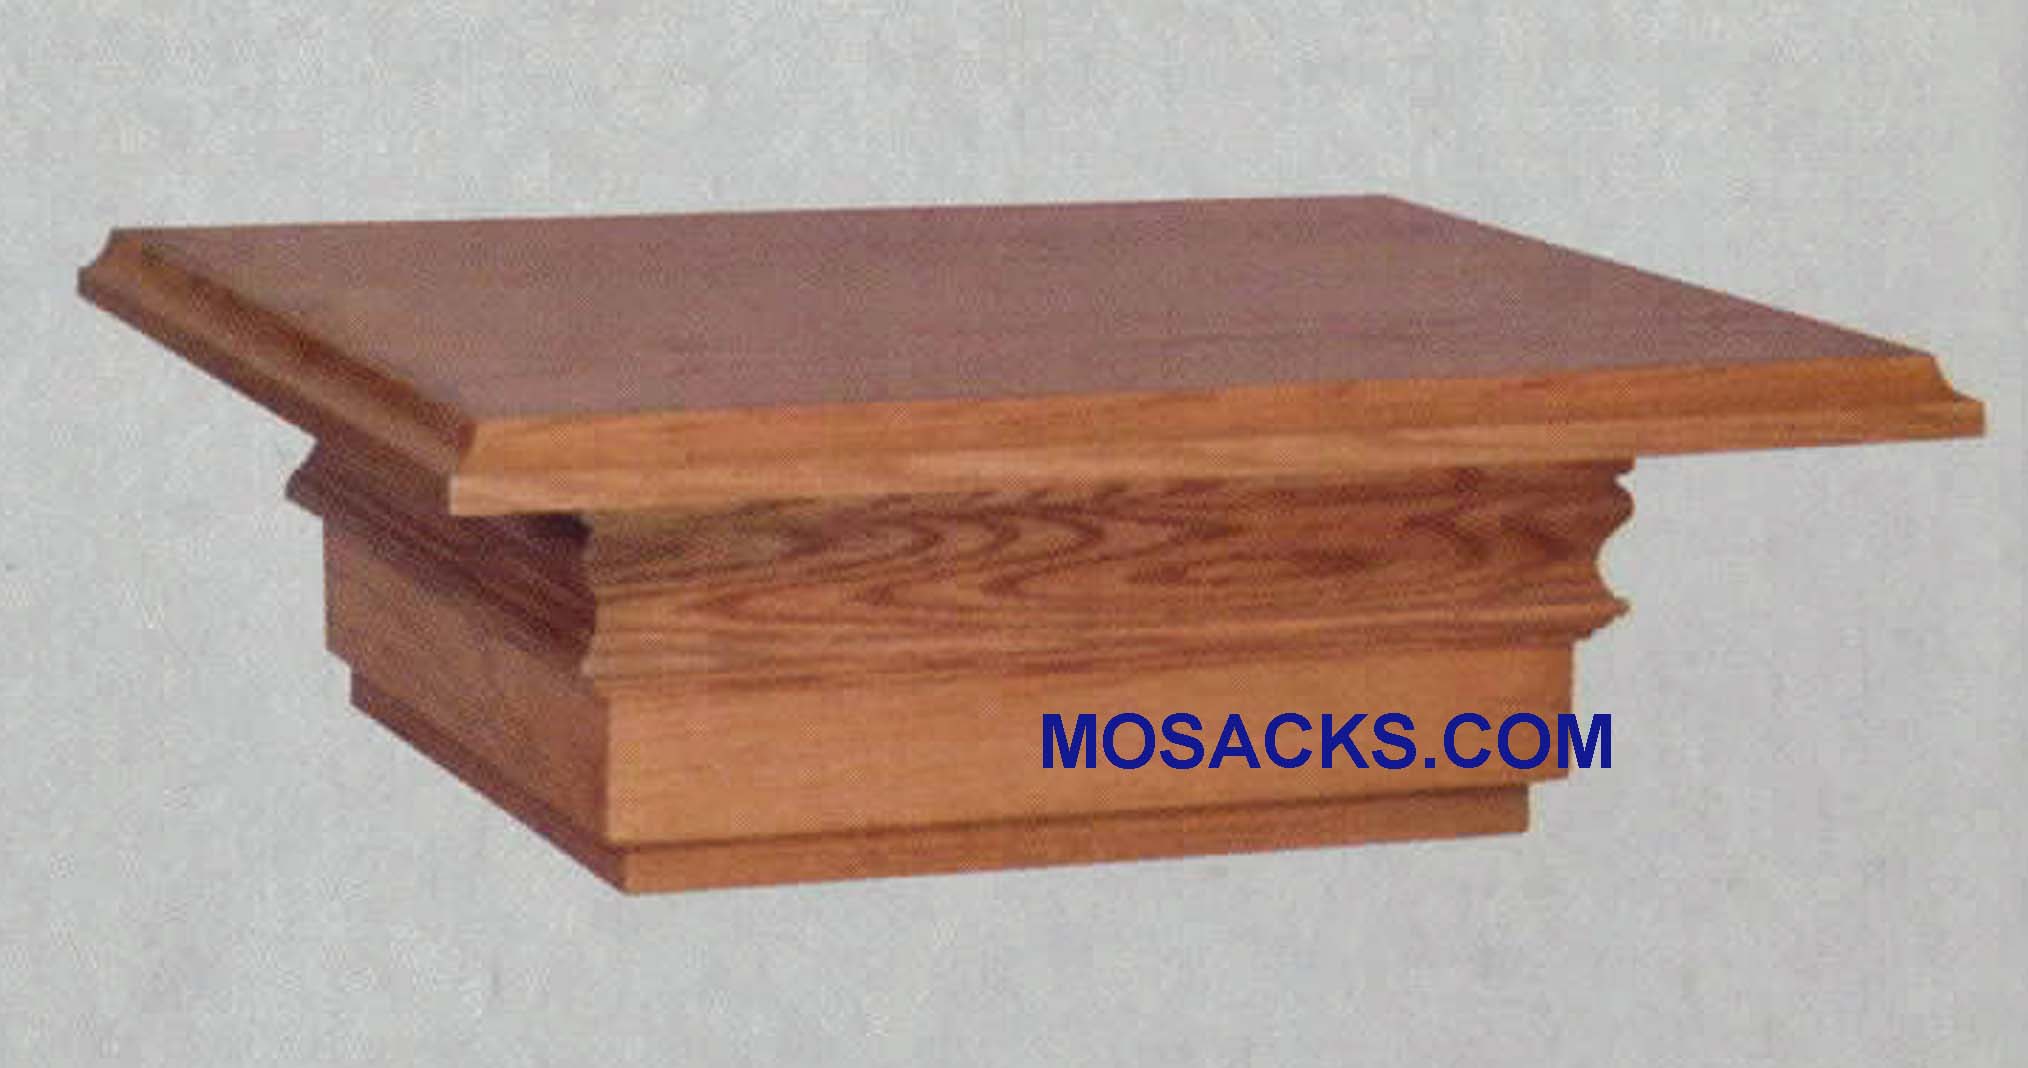 Wooden Wall Mount Statue Pedestal 24"w x 20"d, 8"h #403 W Brand Church Furniture at Mosack’s